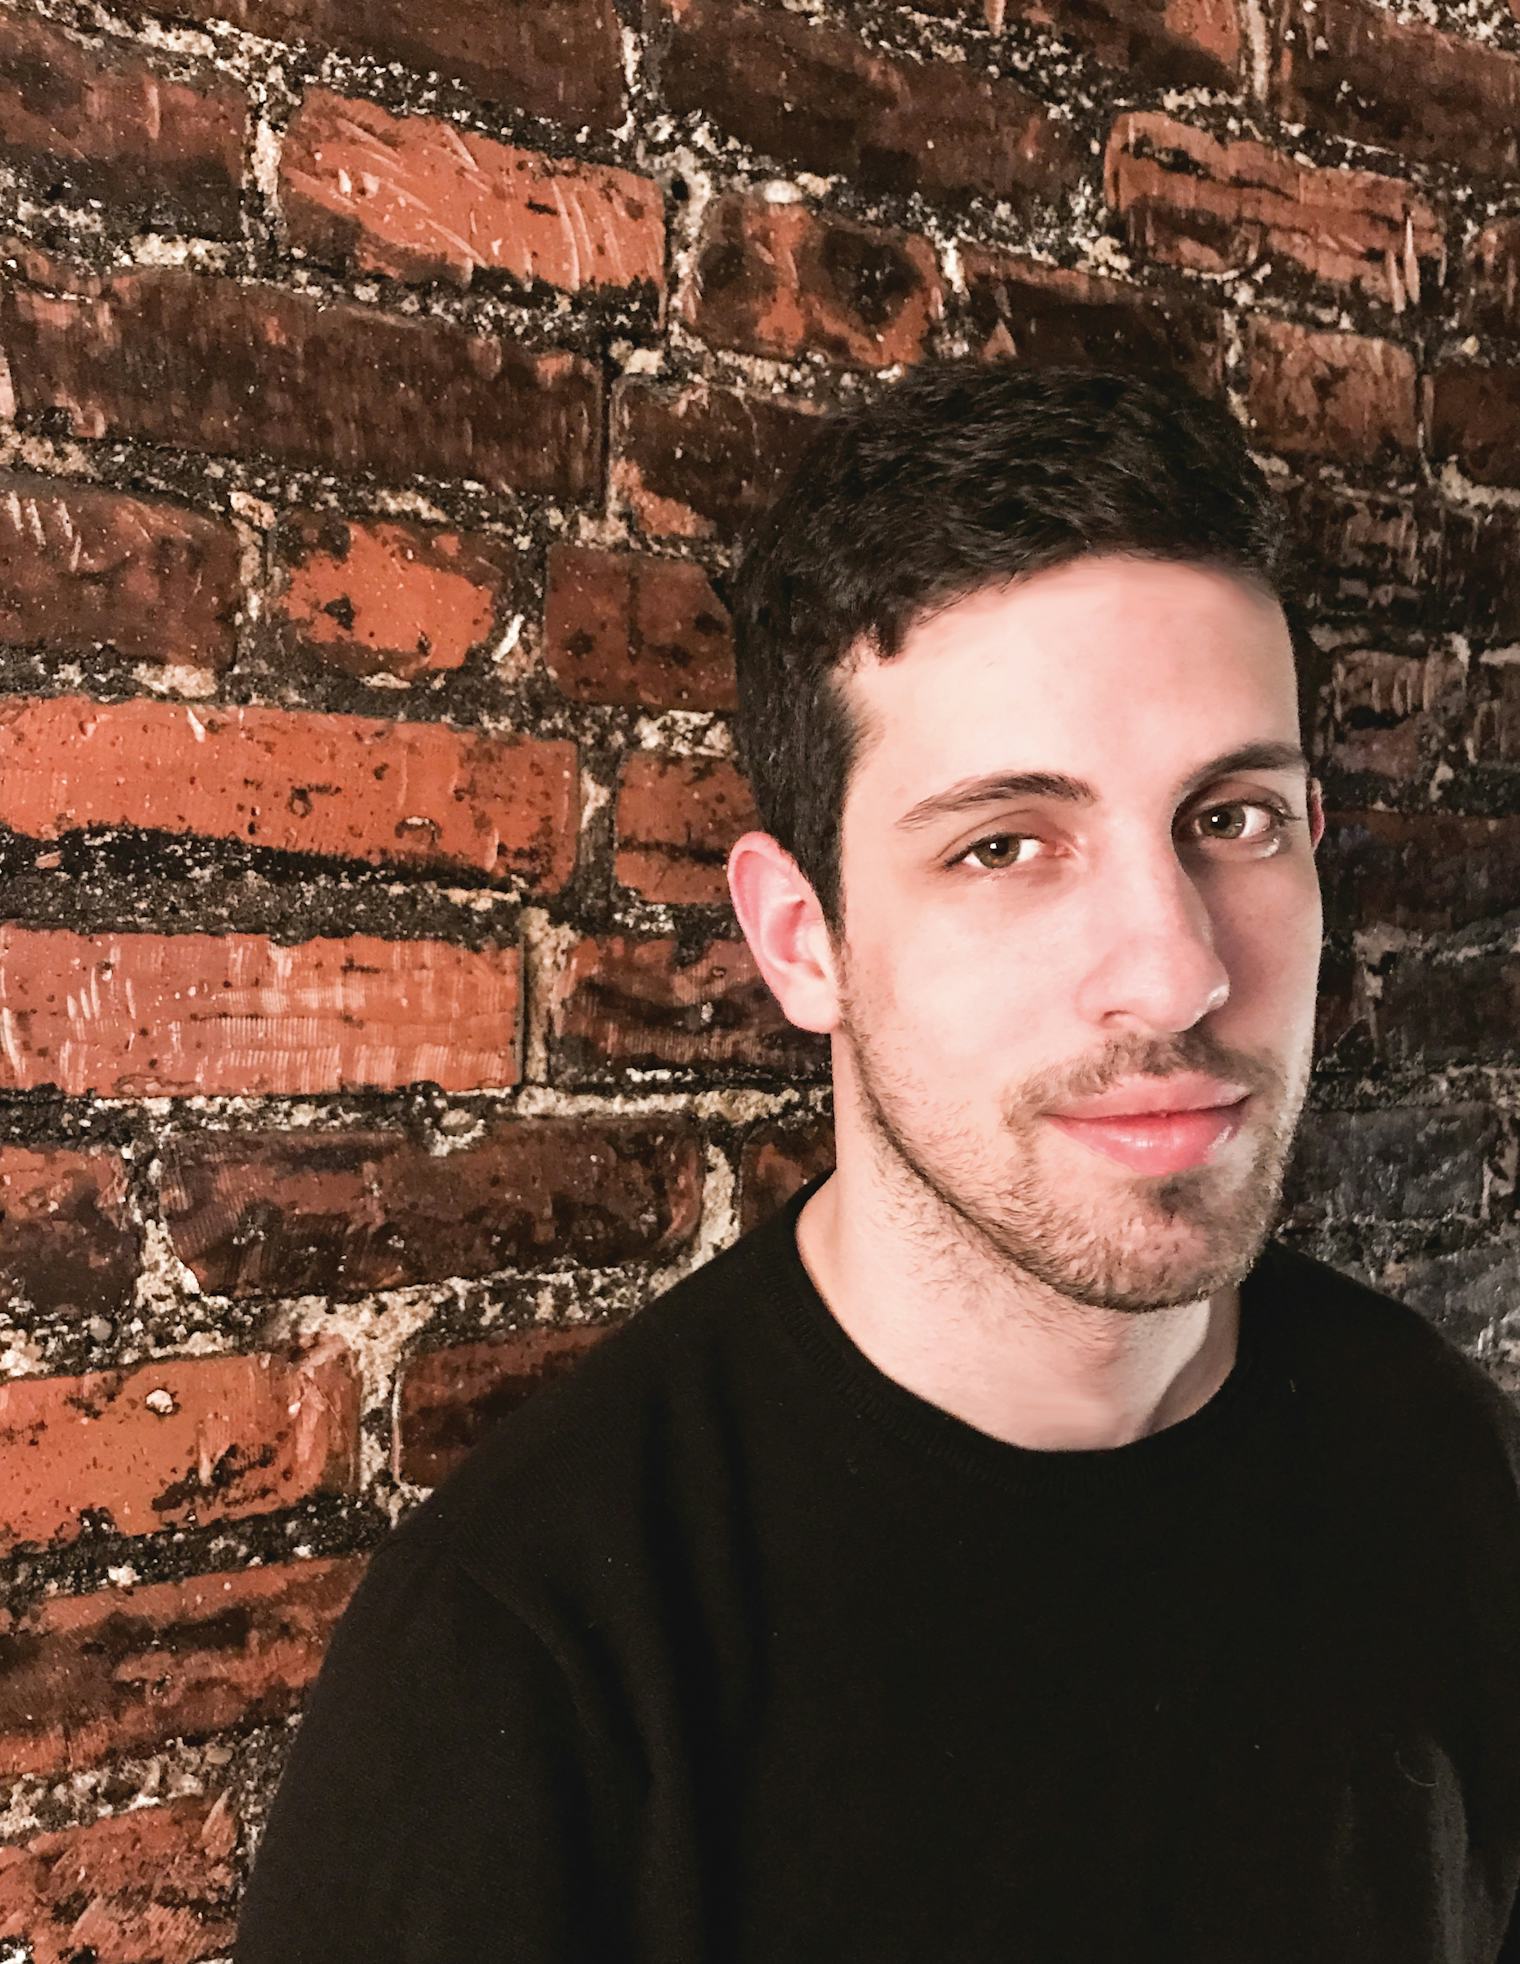 Adam Silvera's 'They Both Die At The End' Imagines A World Where You